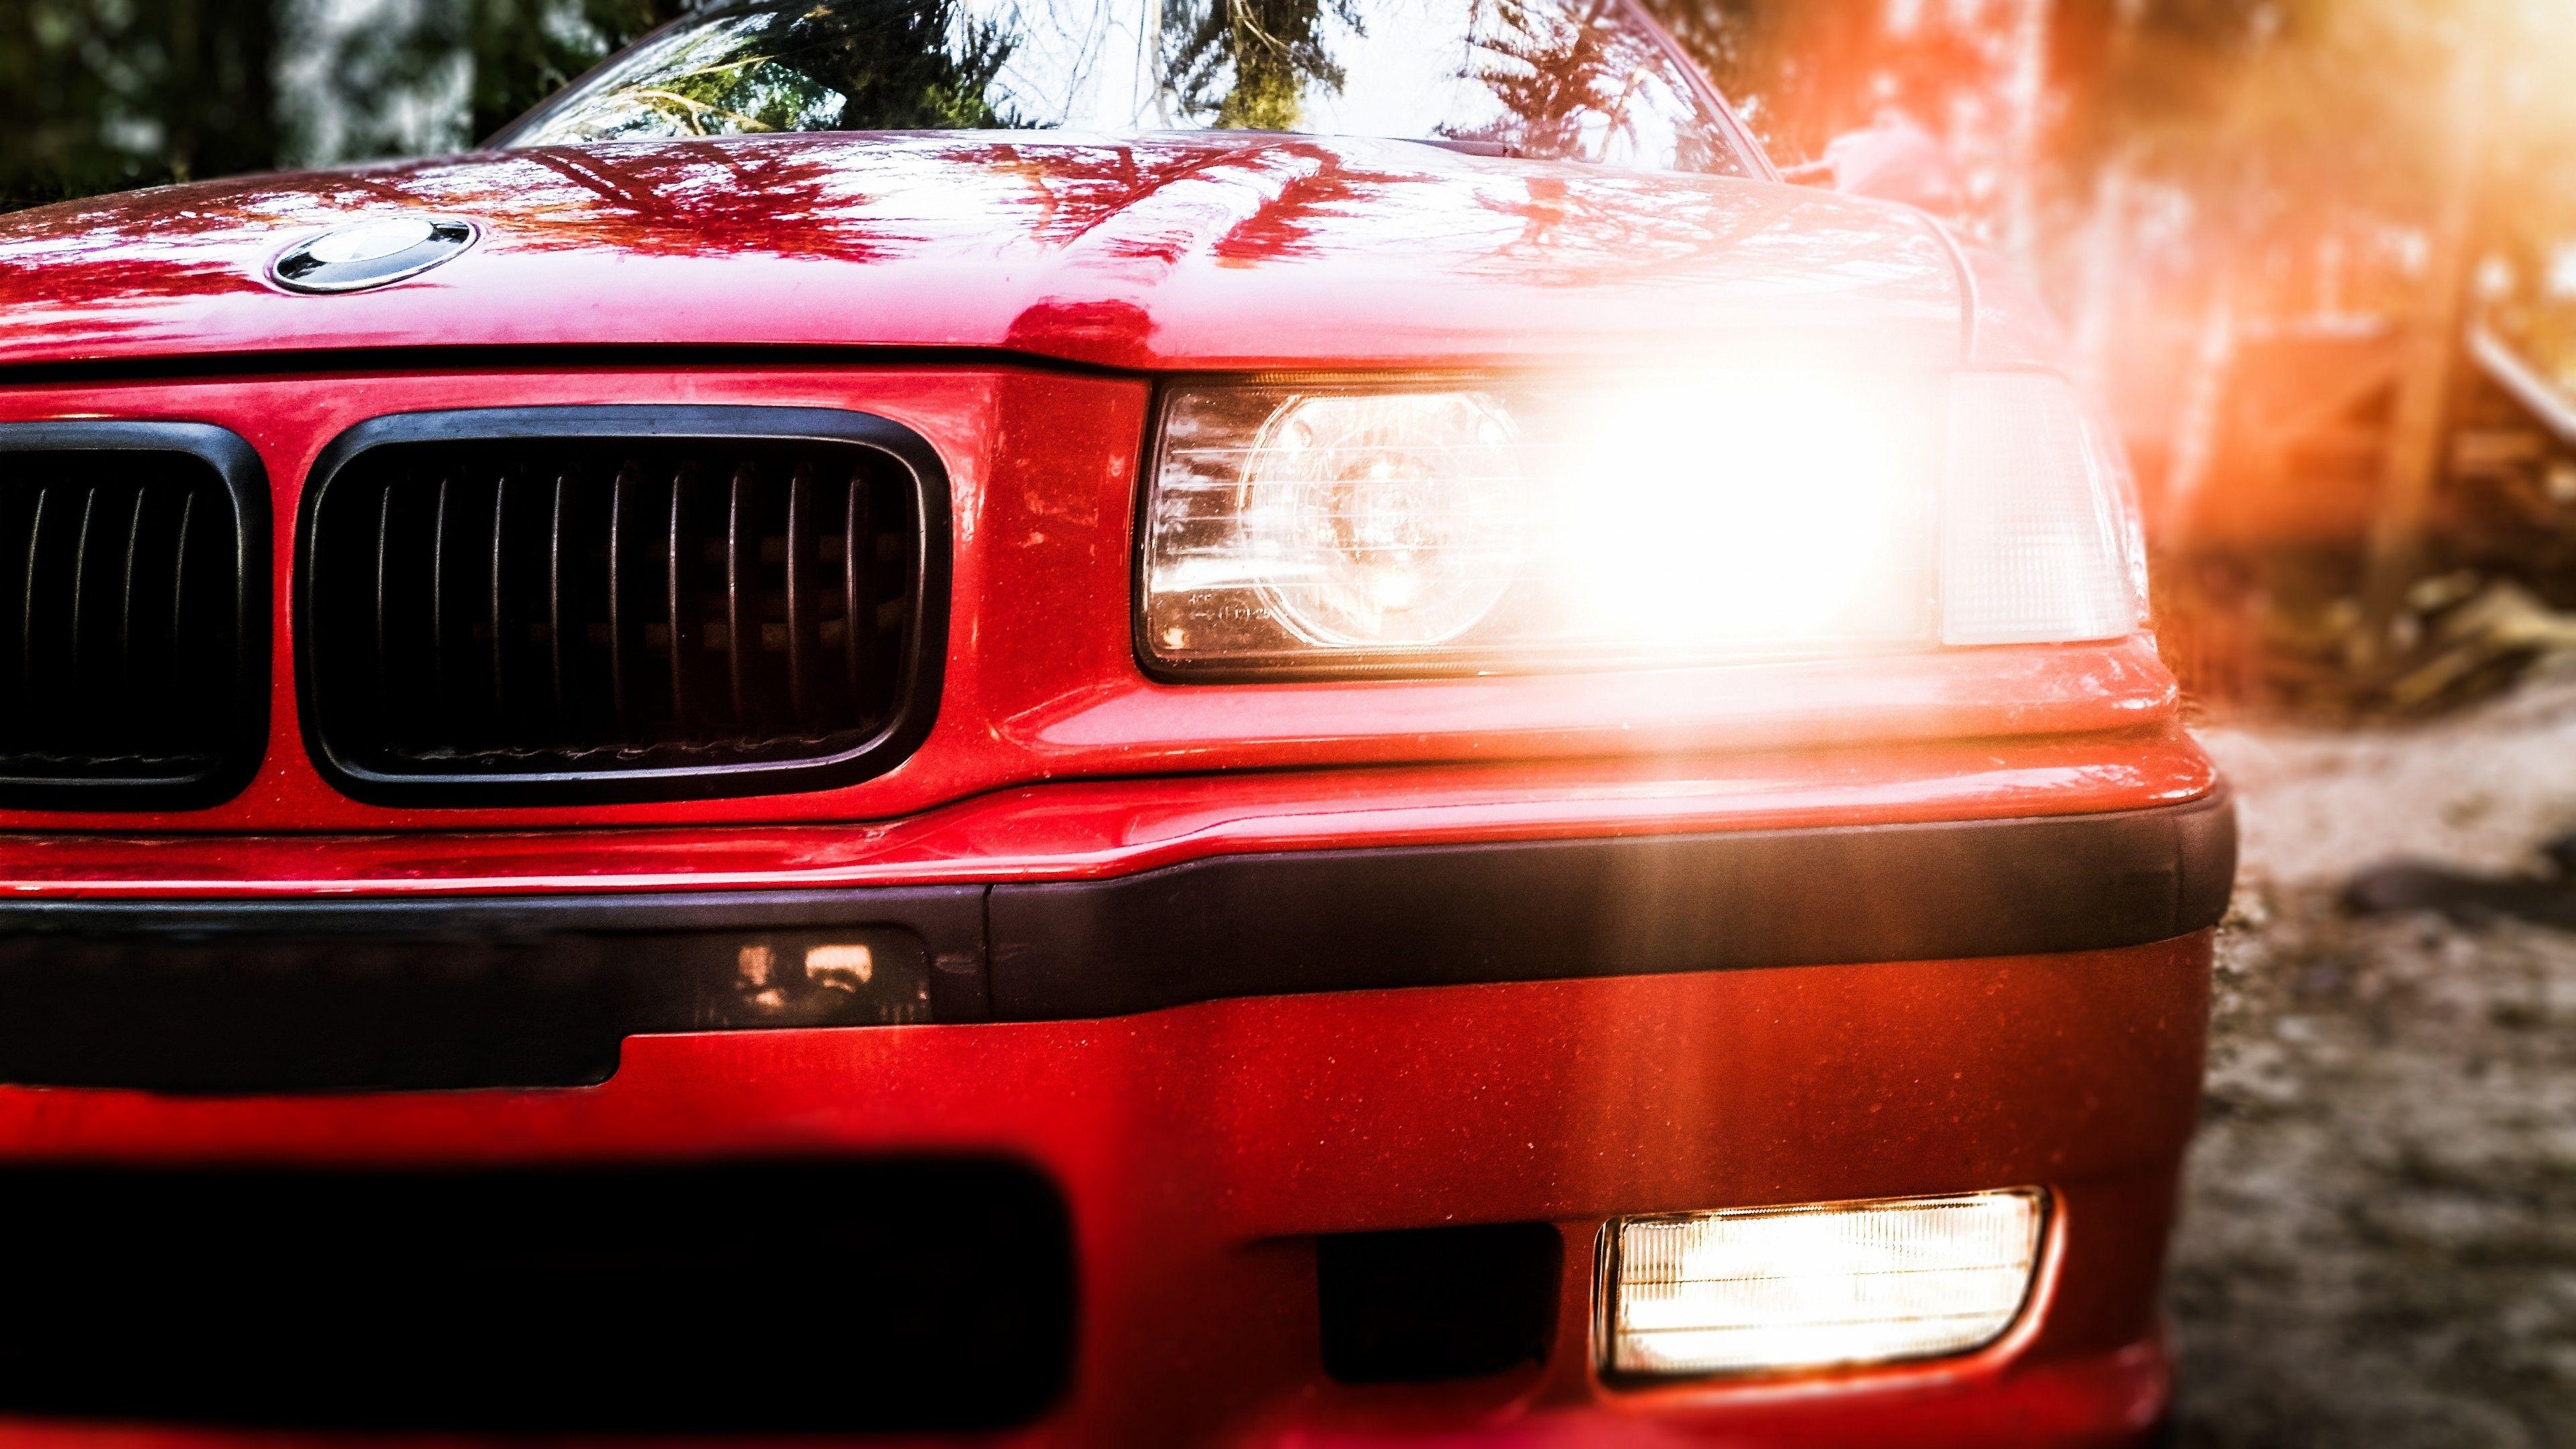 Red E36 Wallpapers Wallpaper Cave